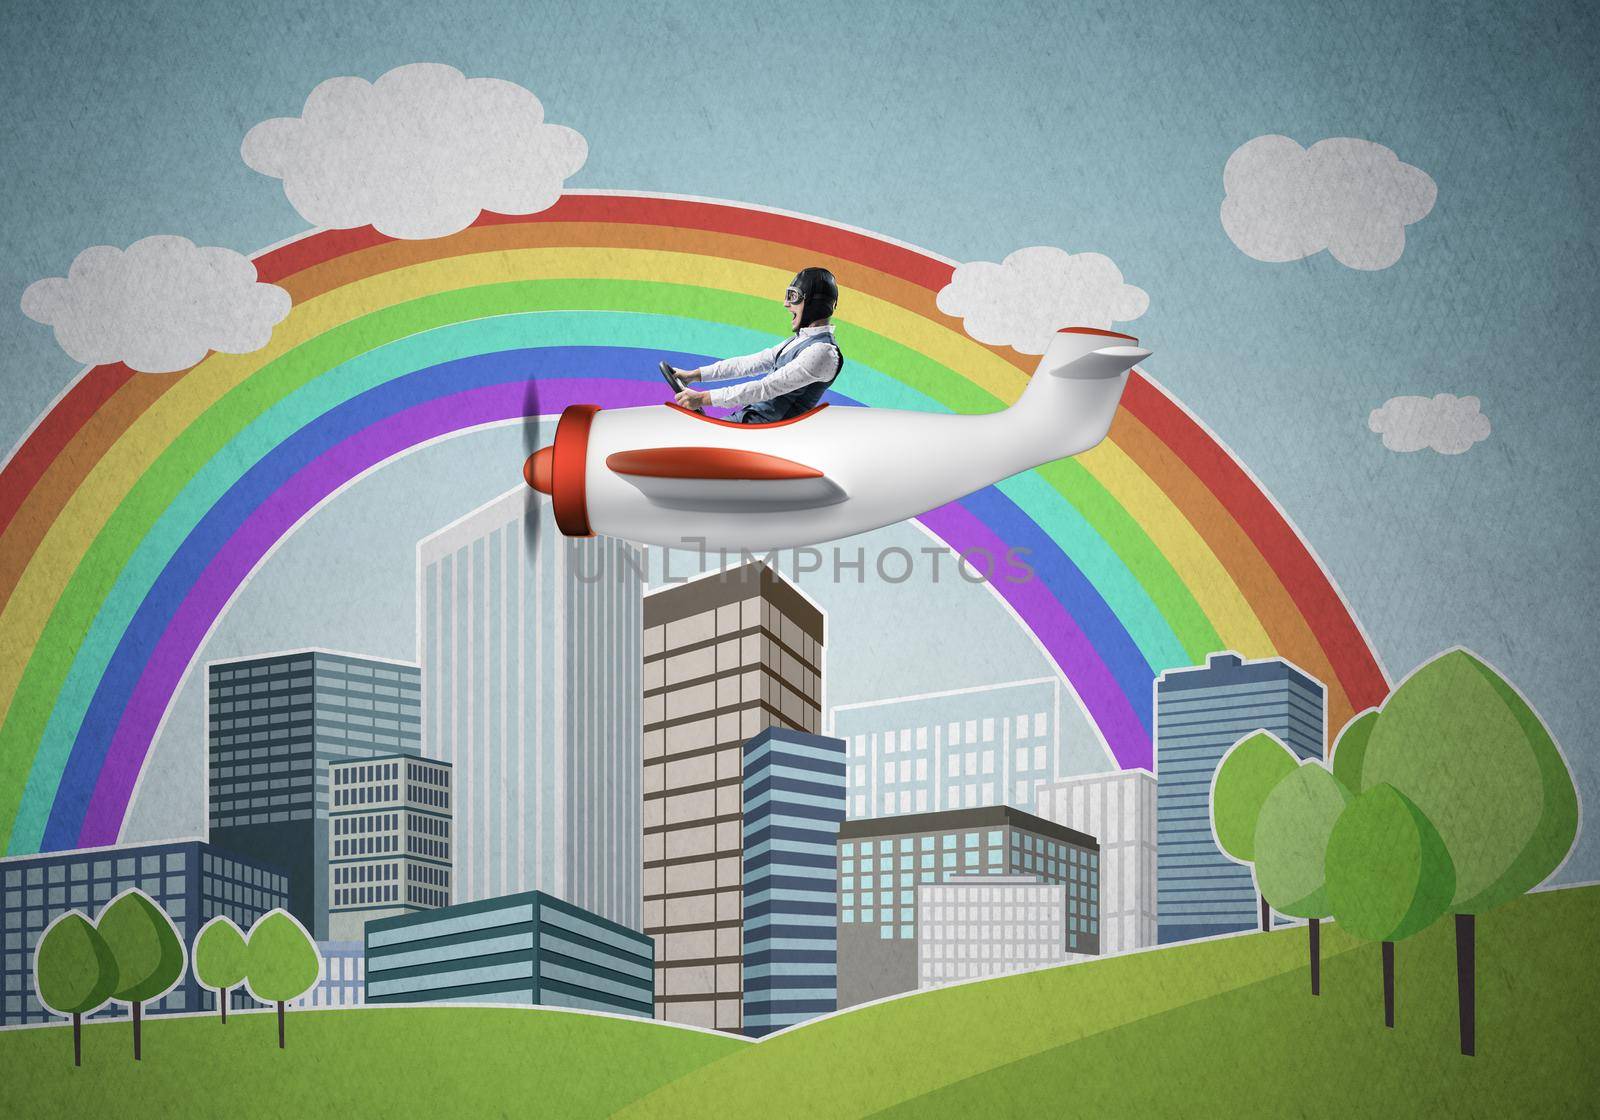 Businessman flying in small propeller plane above metropolis. Aviator driving retro airplane on background of city. Cityscape with high skyscrapers and colorful rainbow. Flying dreams concept